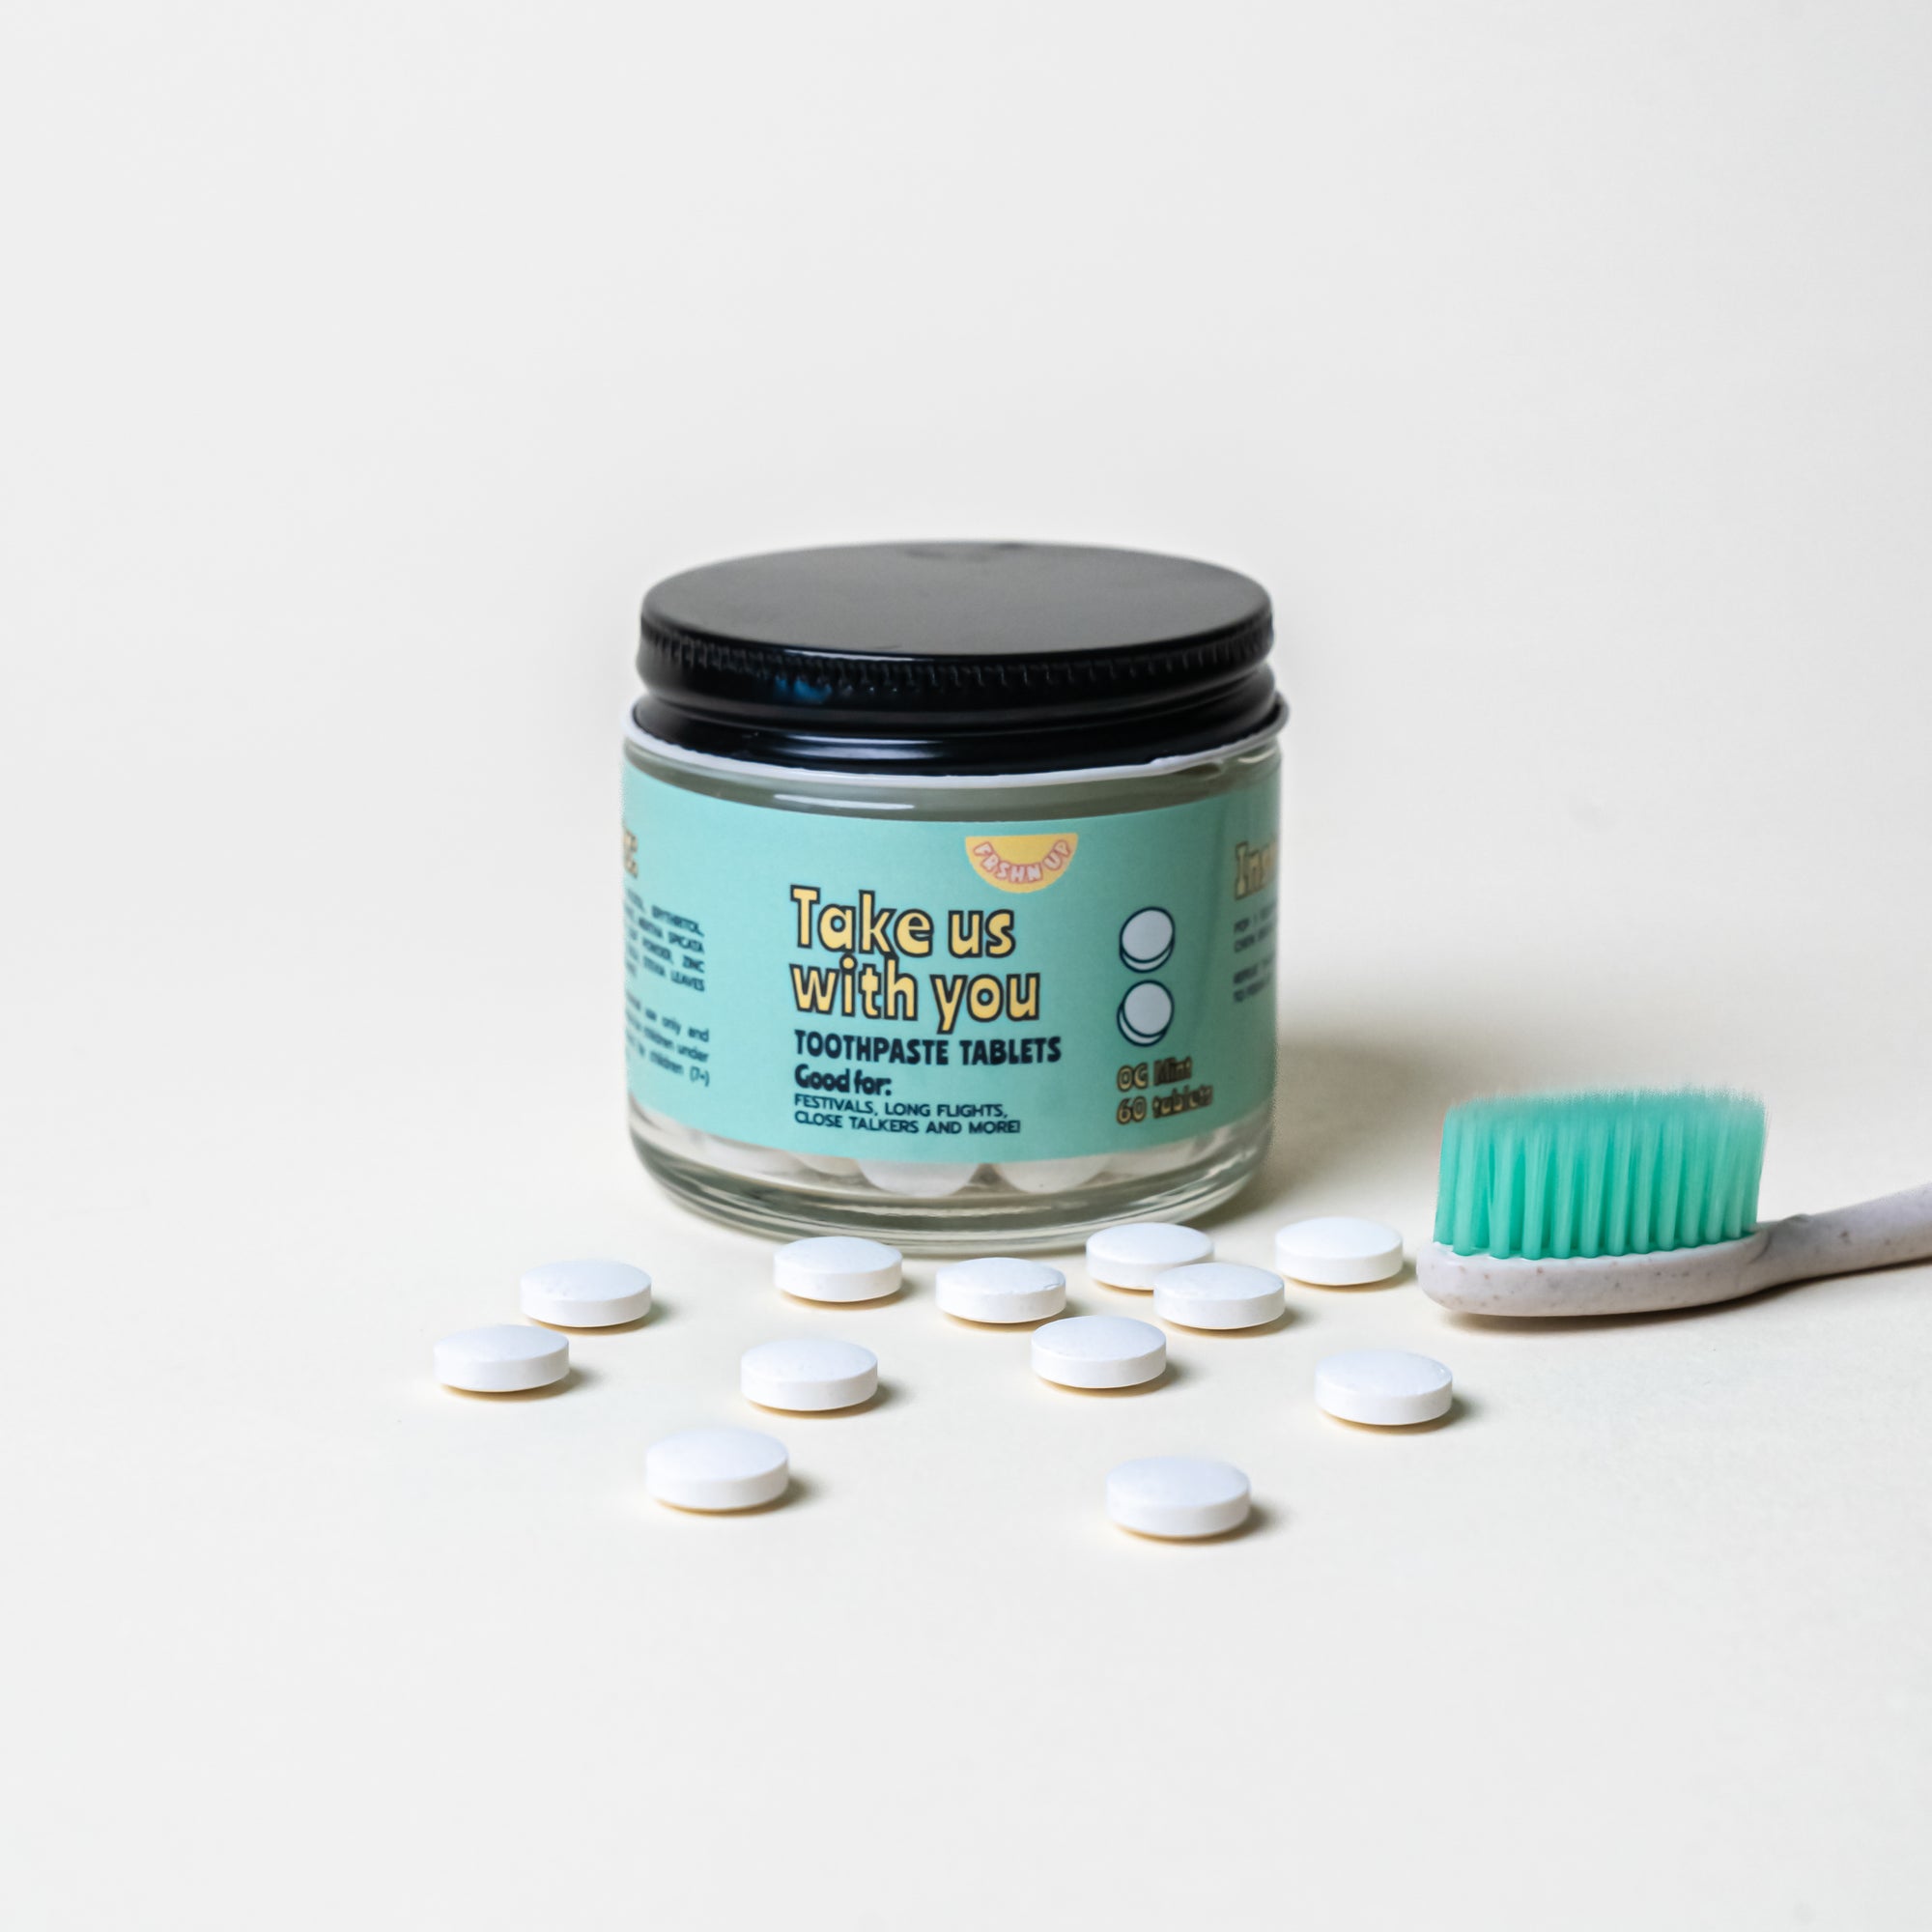 Description: A jar of FRSHN UP Toothpaste Tabs and a toothbrush for sensitive teeth on a white surface.